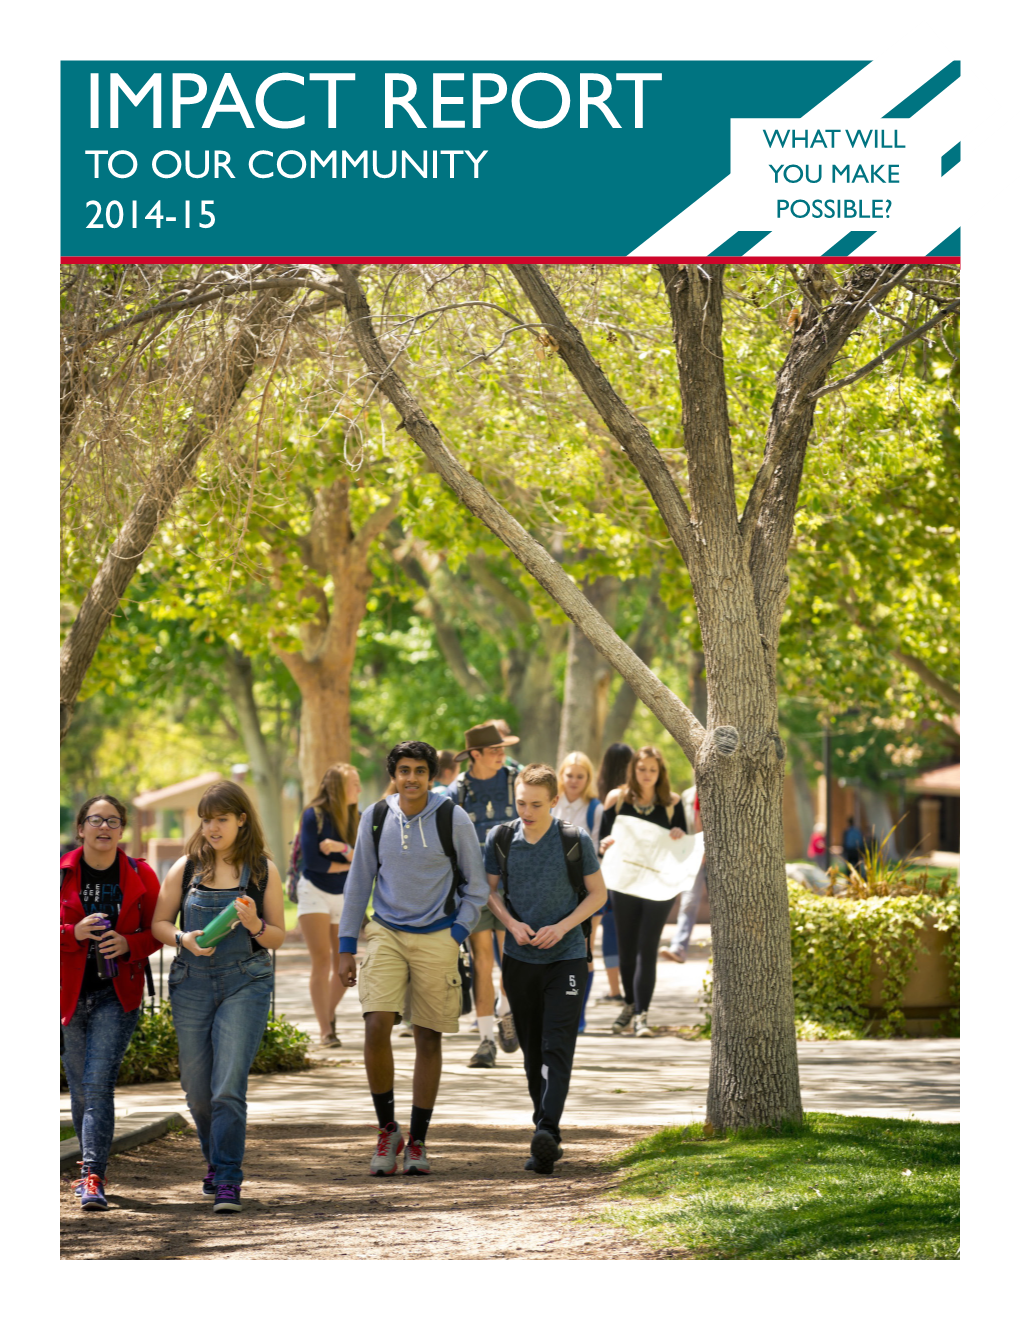 IMPACT REPORT WHAT WILL to OUR COMMUNITY YOU MAKE 2014-15 POSSIBLE? with a Great Sense of Pride and Accomplishment, We Present the Impact Report to Our Community